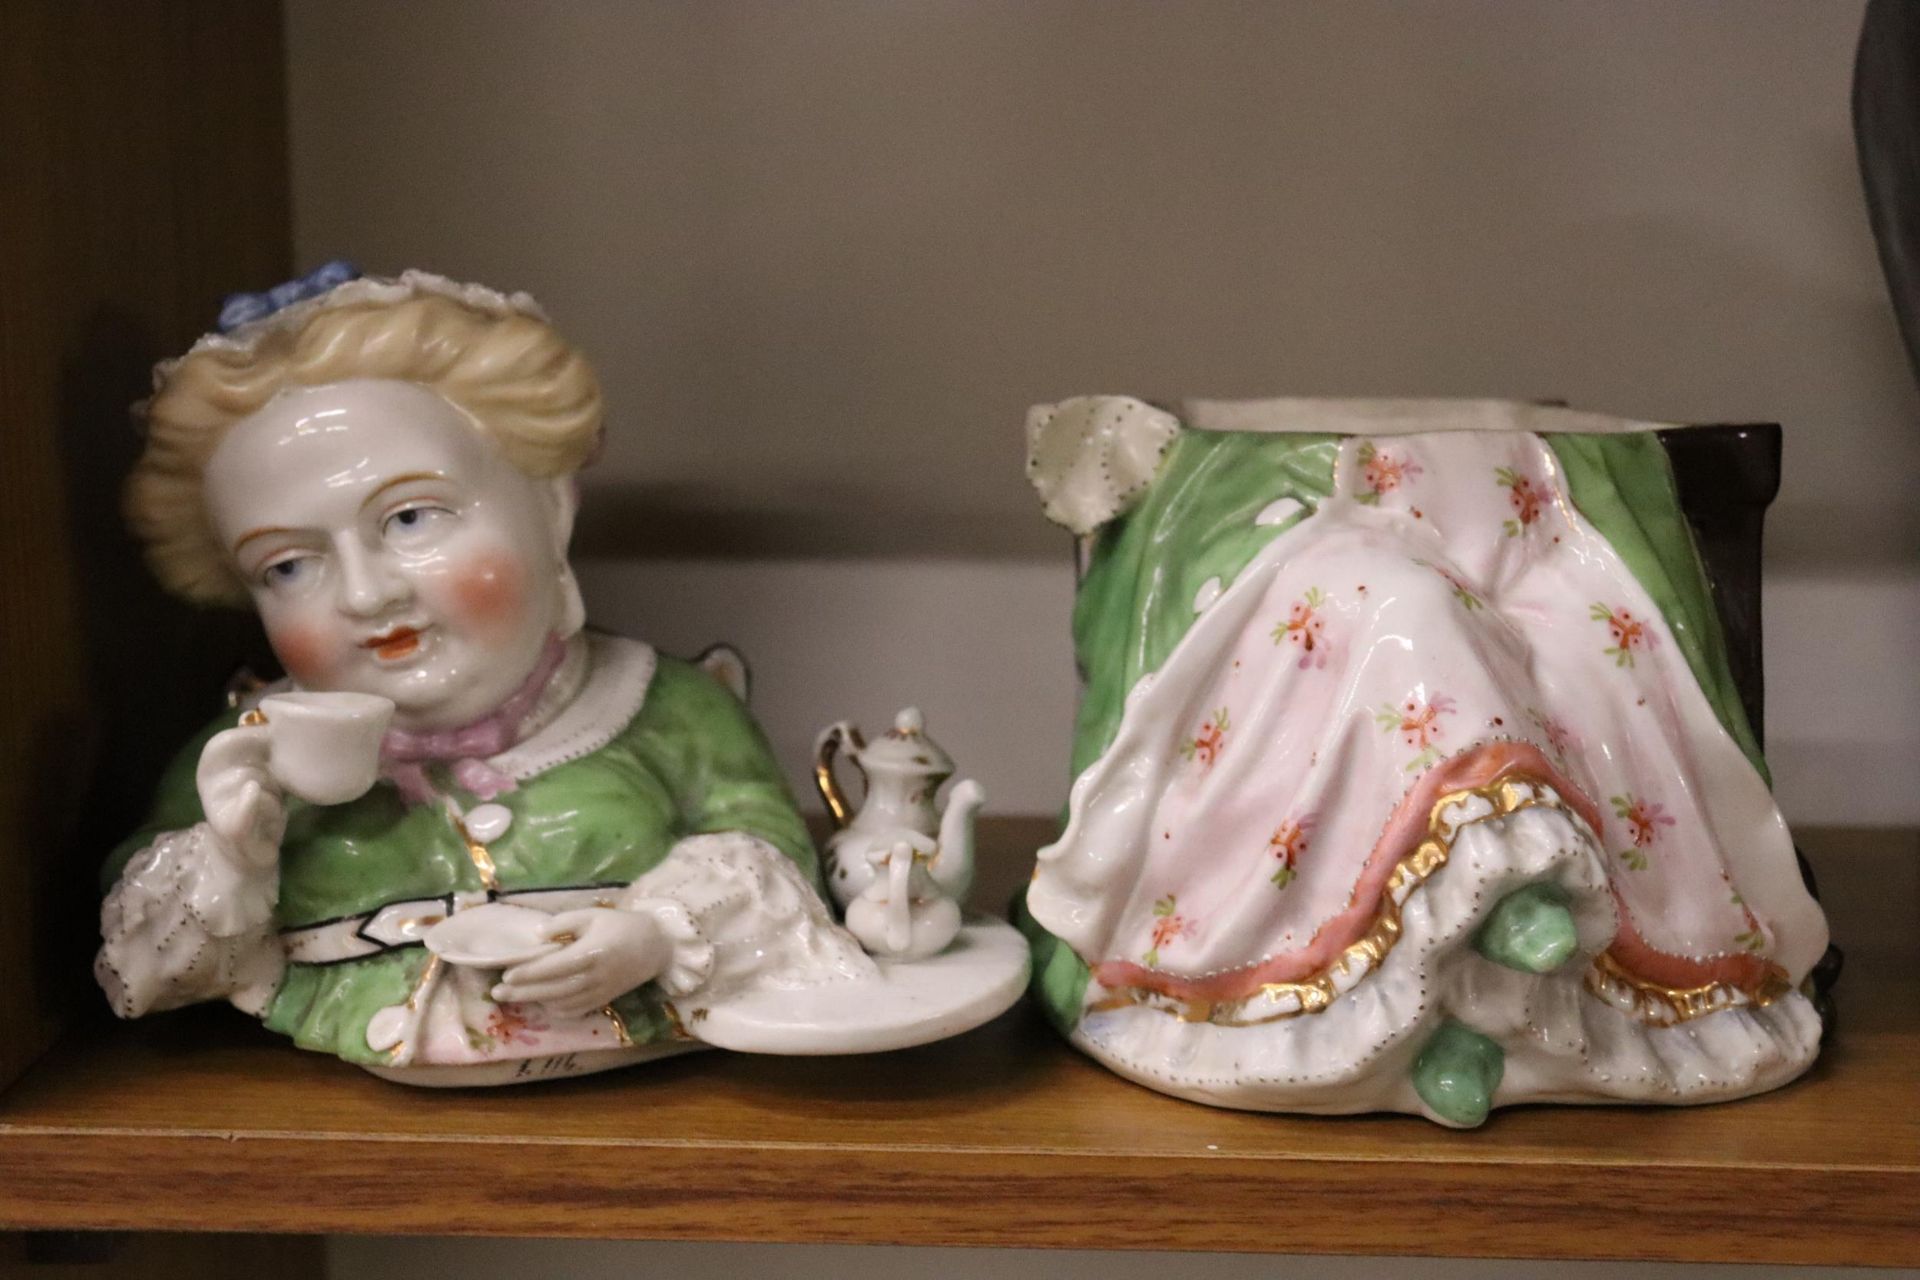 TWO VINTAGE ORIGINAL GERMAN TOBACCO JARS, A MAN AND A LADY WITH A CUP OF TEA, GOOD COLOURS, JOHN - Image 11 of 11